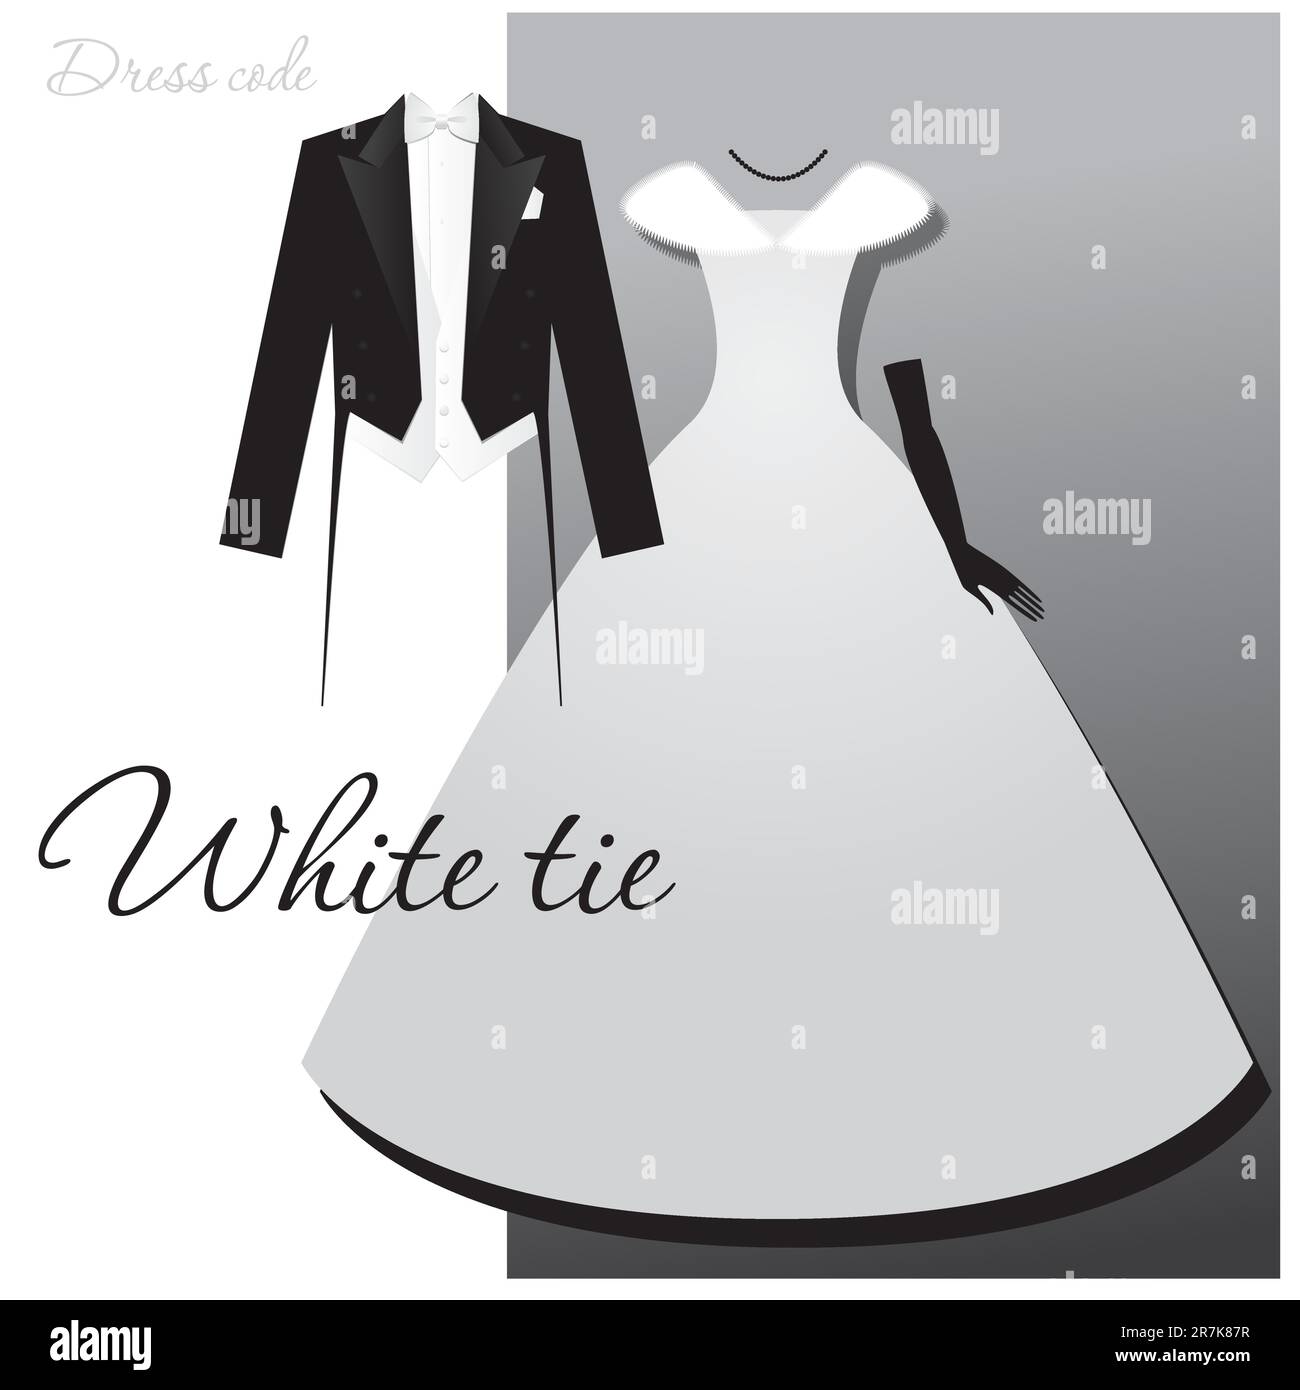 Dress code - White tie. Male - tails, light vest and white bow tie, a woman - a ball or evening gown, long gloves and a fur cape. Stock Vector